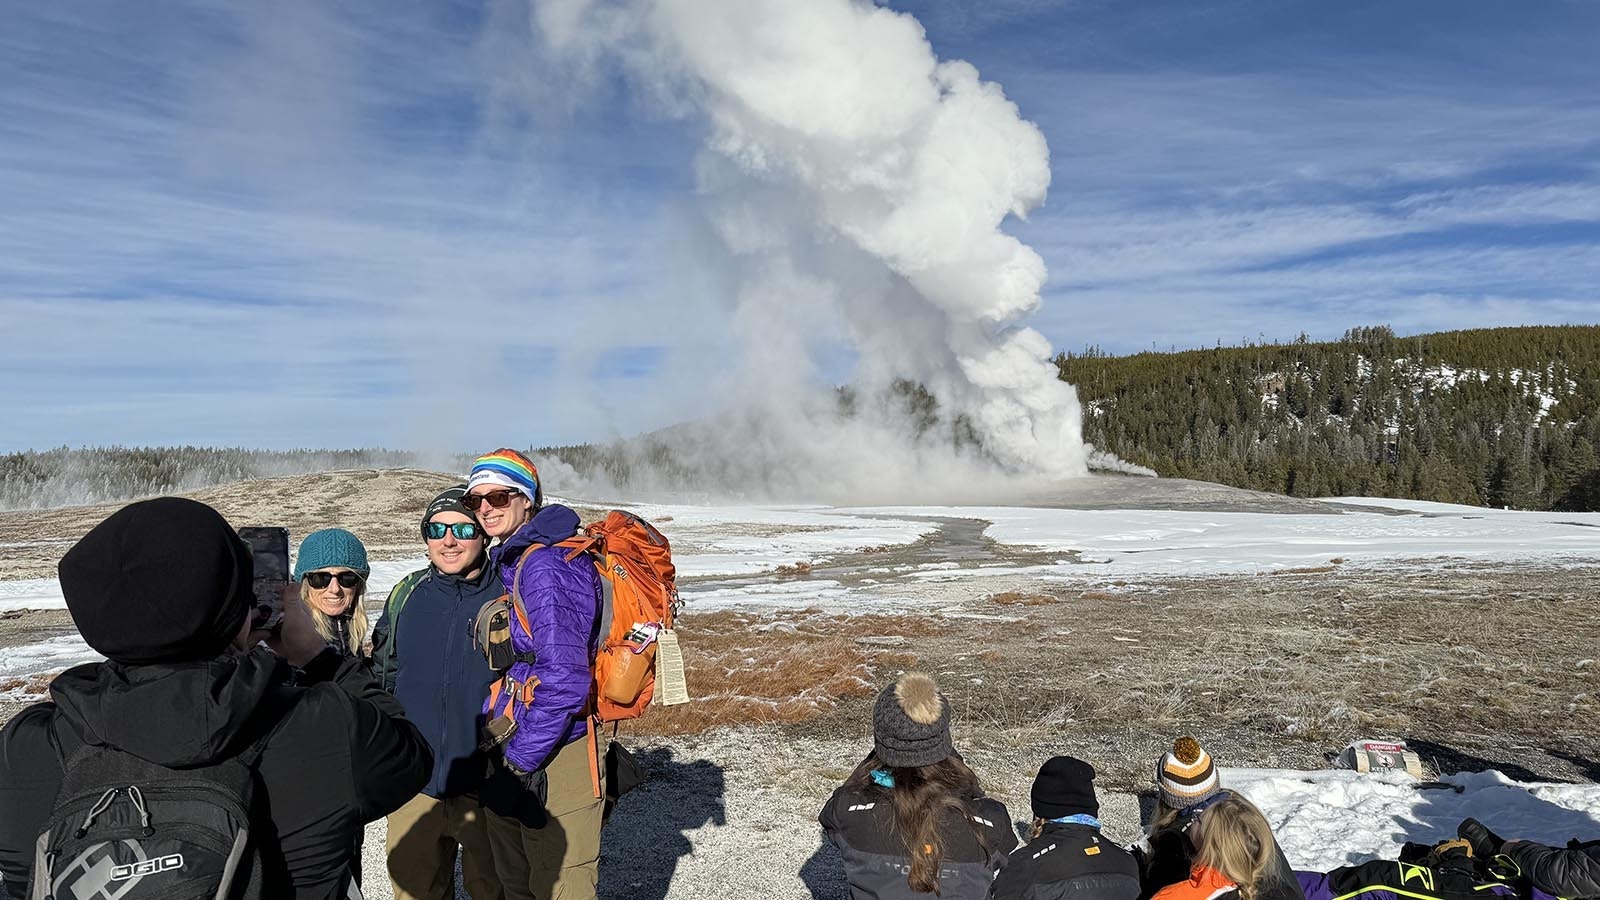 Taking pictures of an Old Faithful eruption during a mid-December snowcoach tour of Yellowstone National Park.